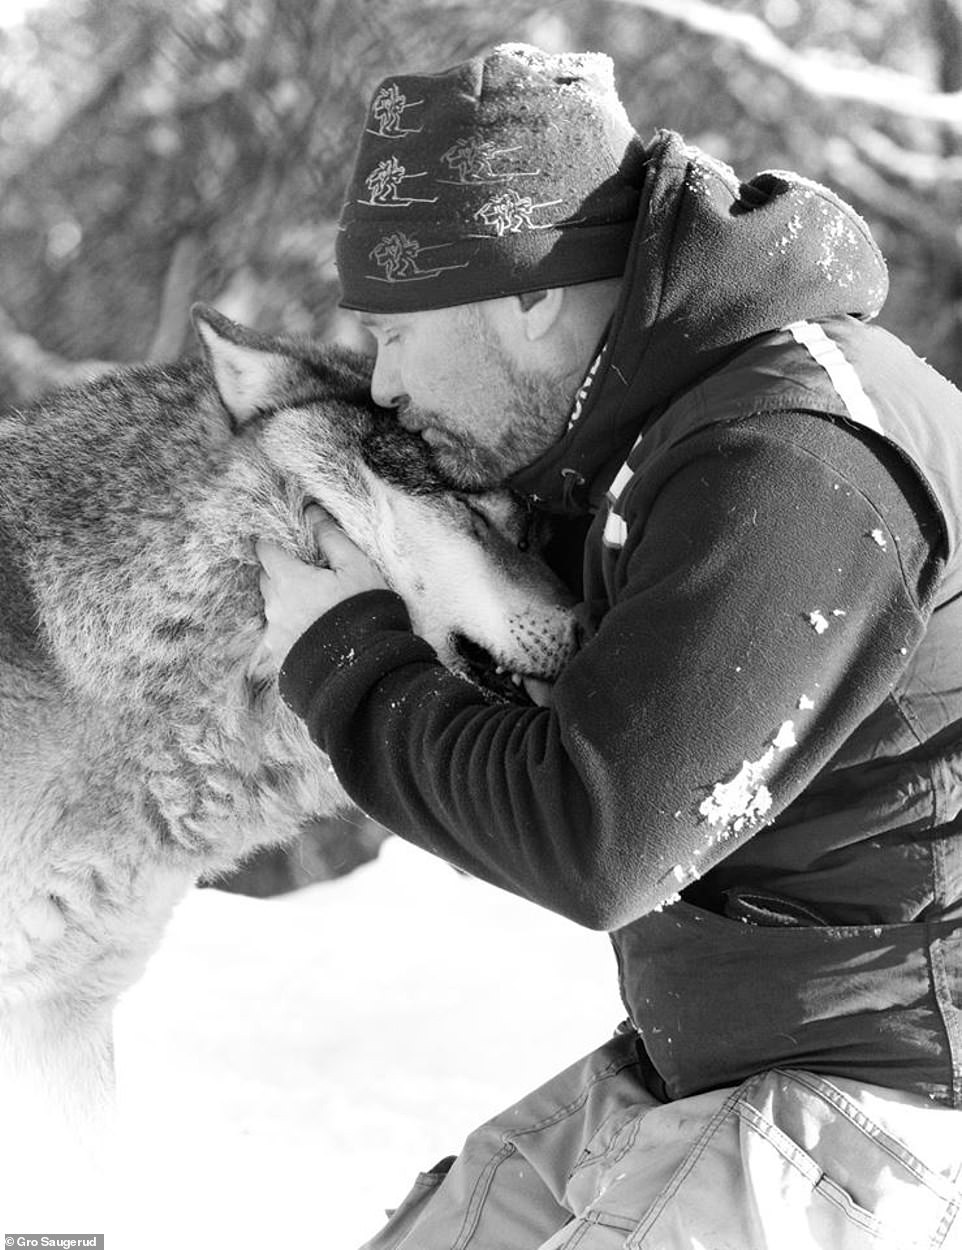 'I feel so lucky to have a relationship with these amazing animals and see them everyday,' Frank said. He shares a tender moment with a wolf from his pack at Langedrag Nature Park